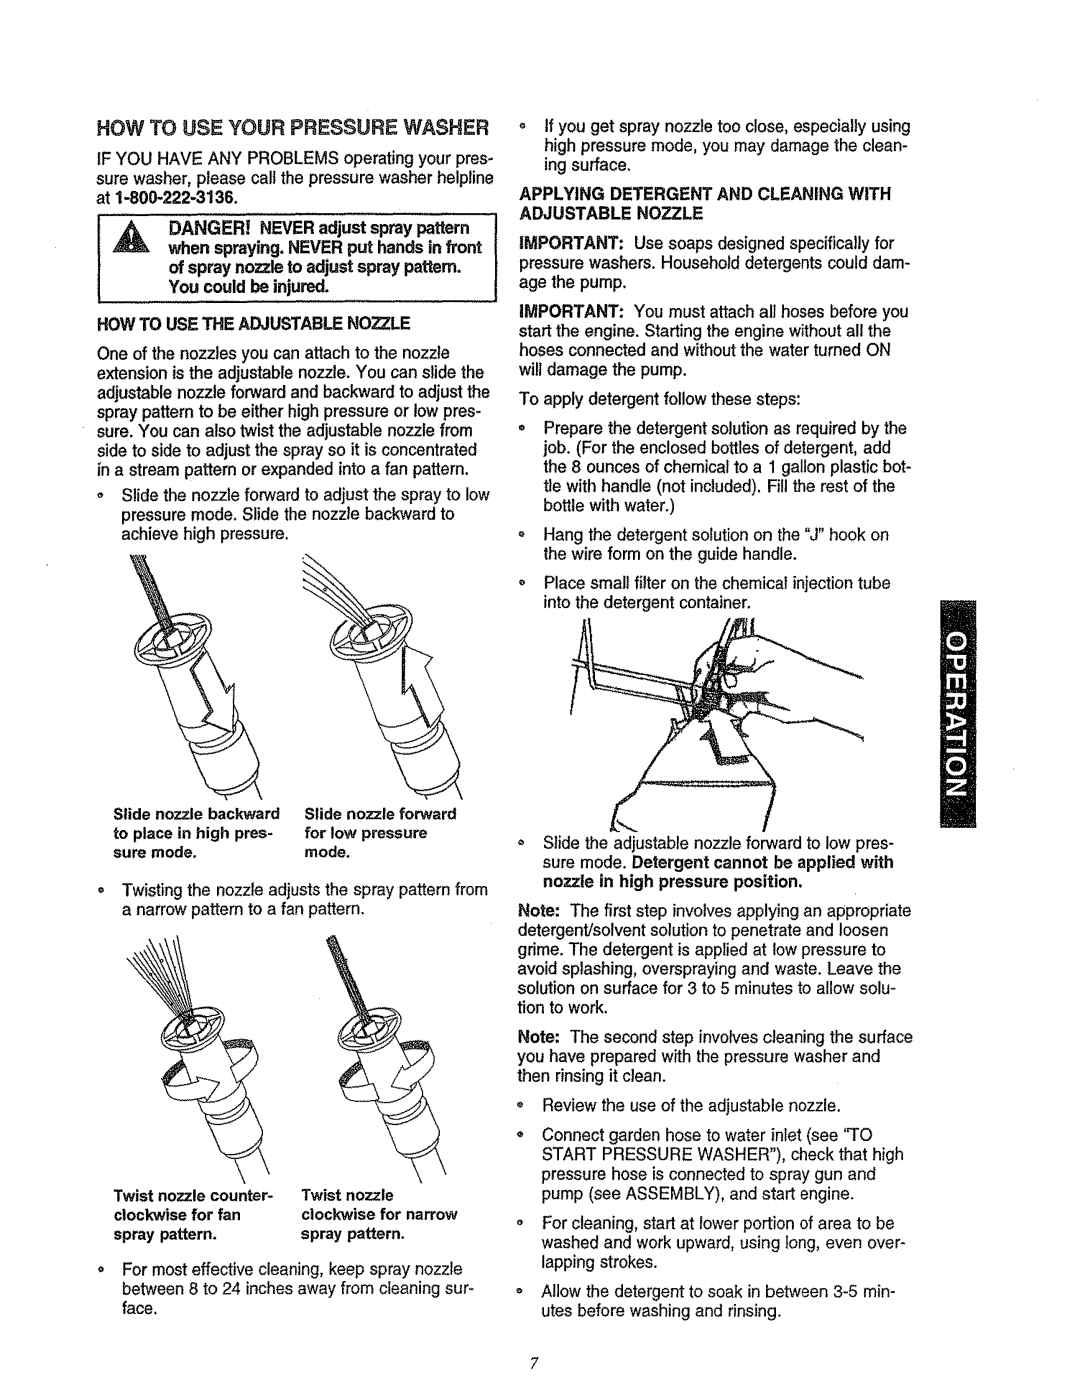 Craftsman 580.7622 manual How To Use Your Pressure Washer, You could be injured, How To Use The Adjustable Nozzle, mode 